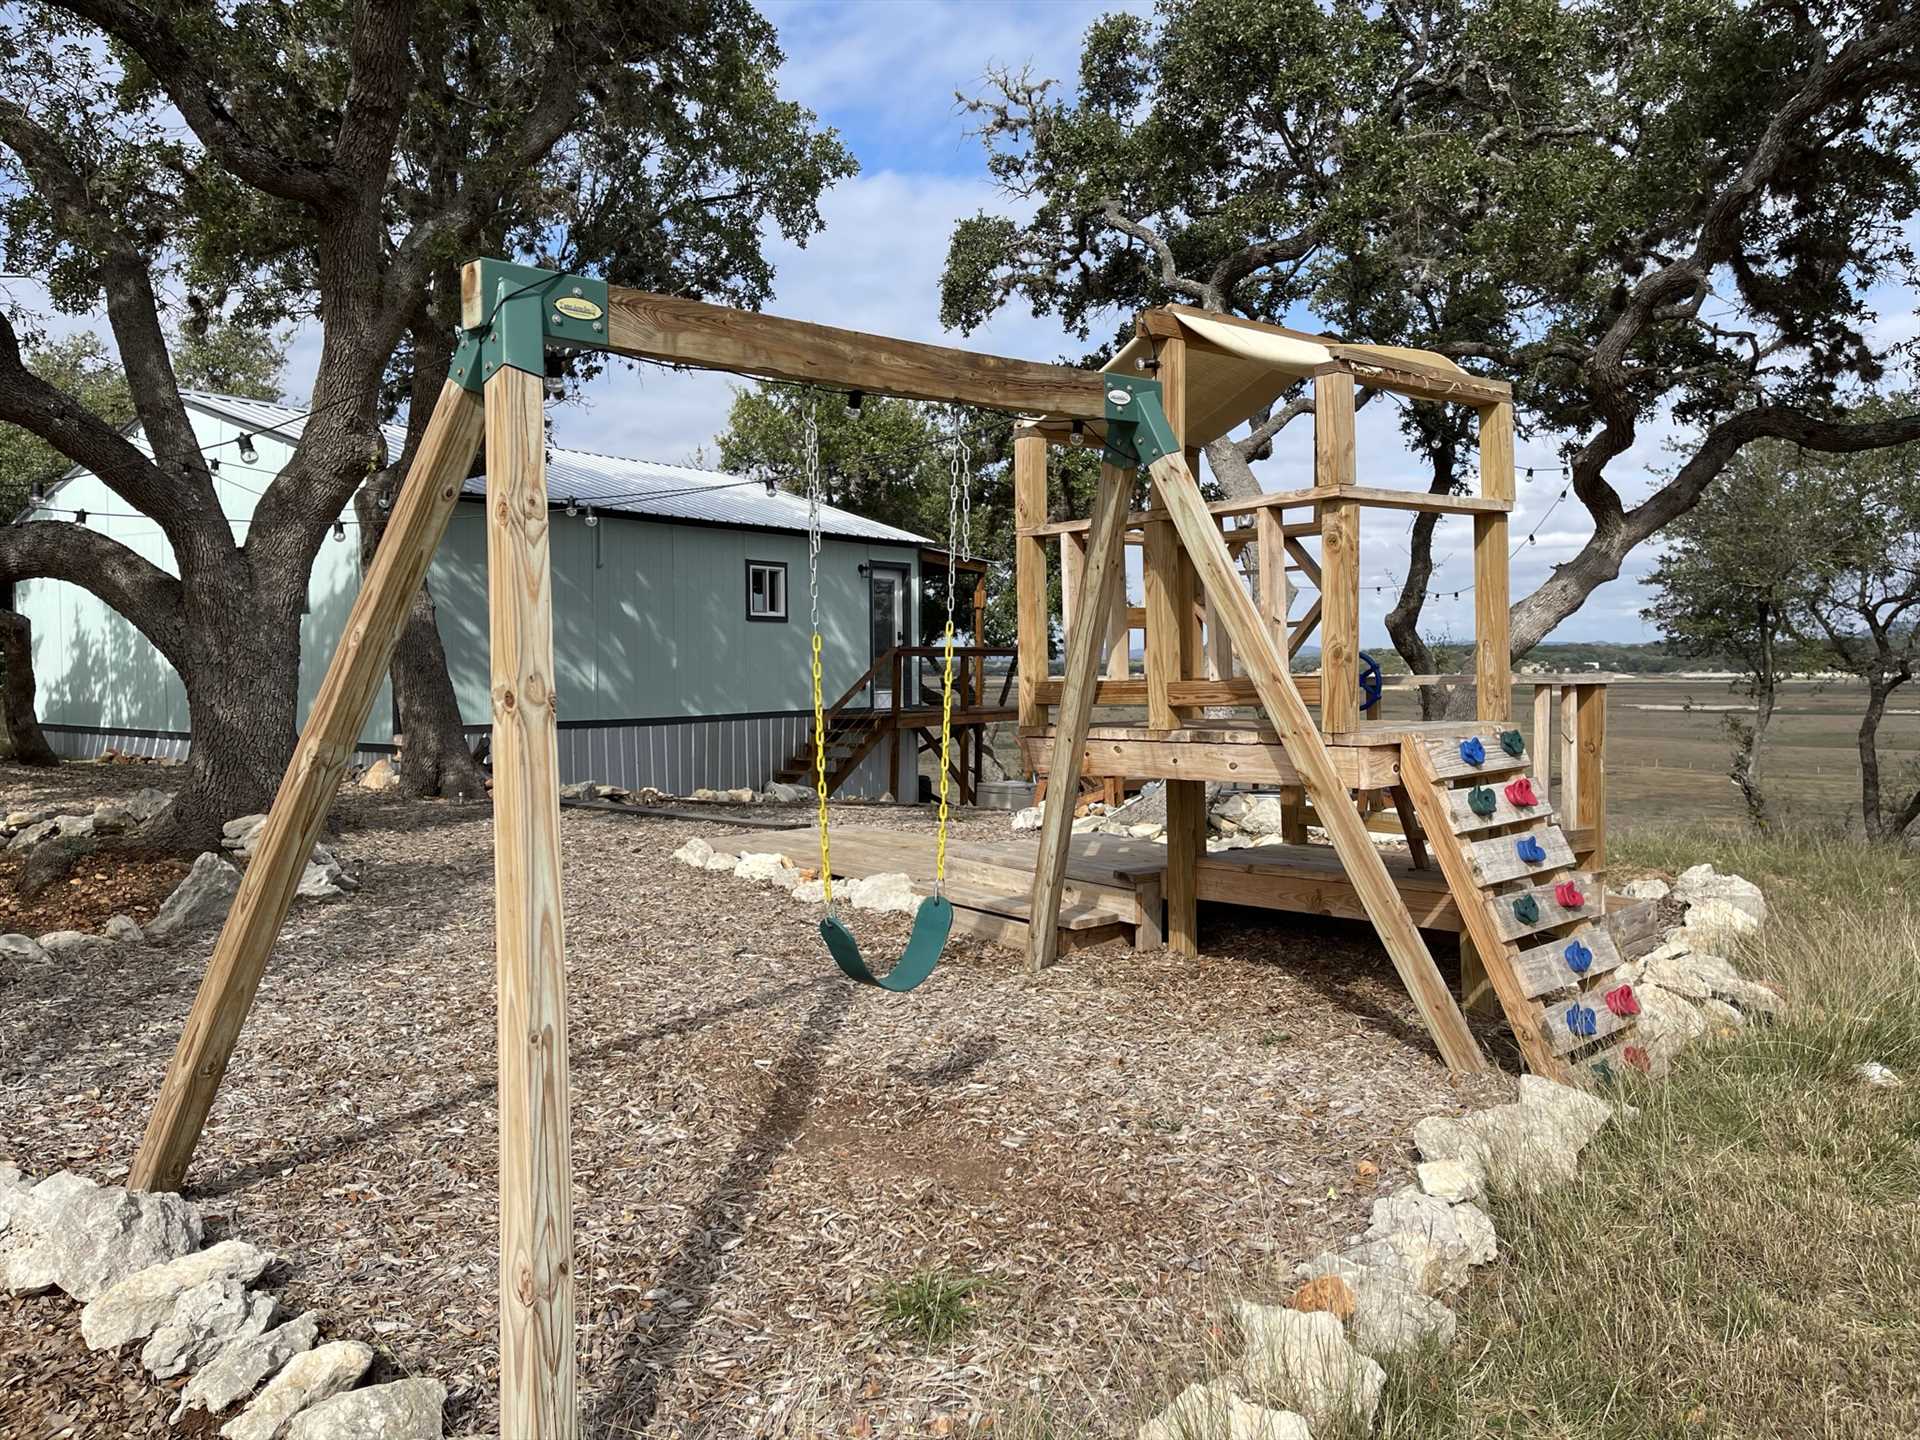                                                 The Roost's backyard also features this fun and unique playscape, where the young ones can work off all that extra energy.